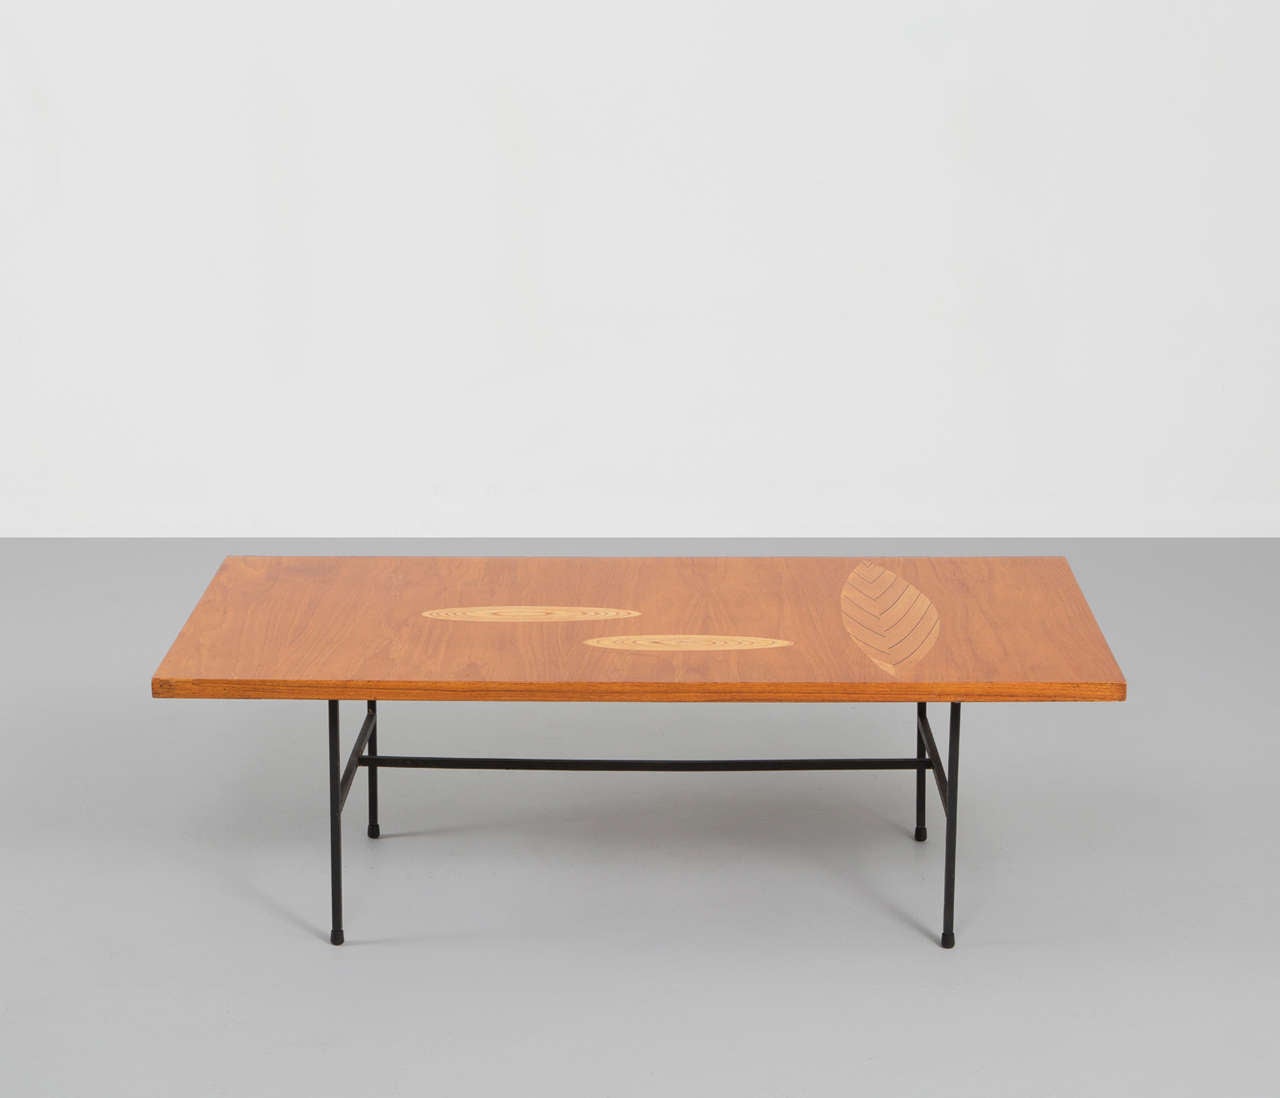 Finnish Tapio Wirkkala Coffee Table with Remarkable Leaf Ornaments